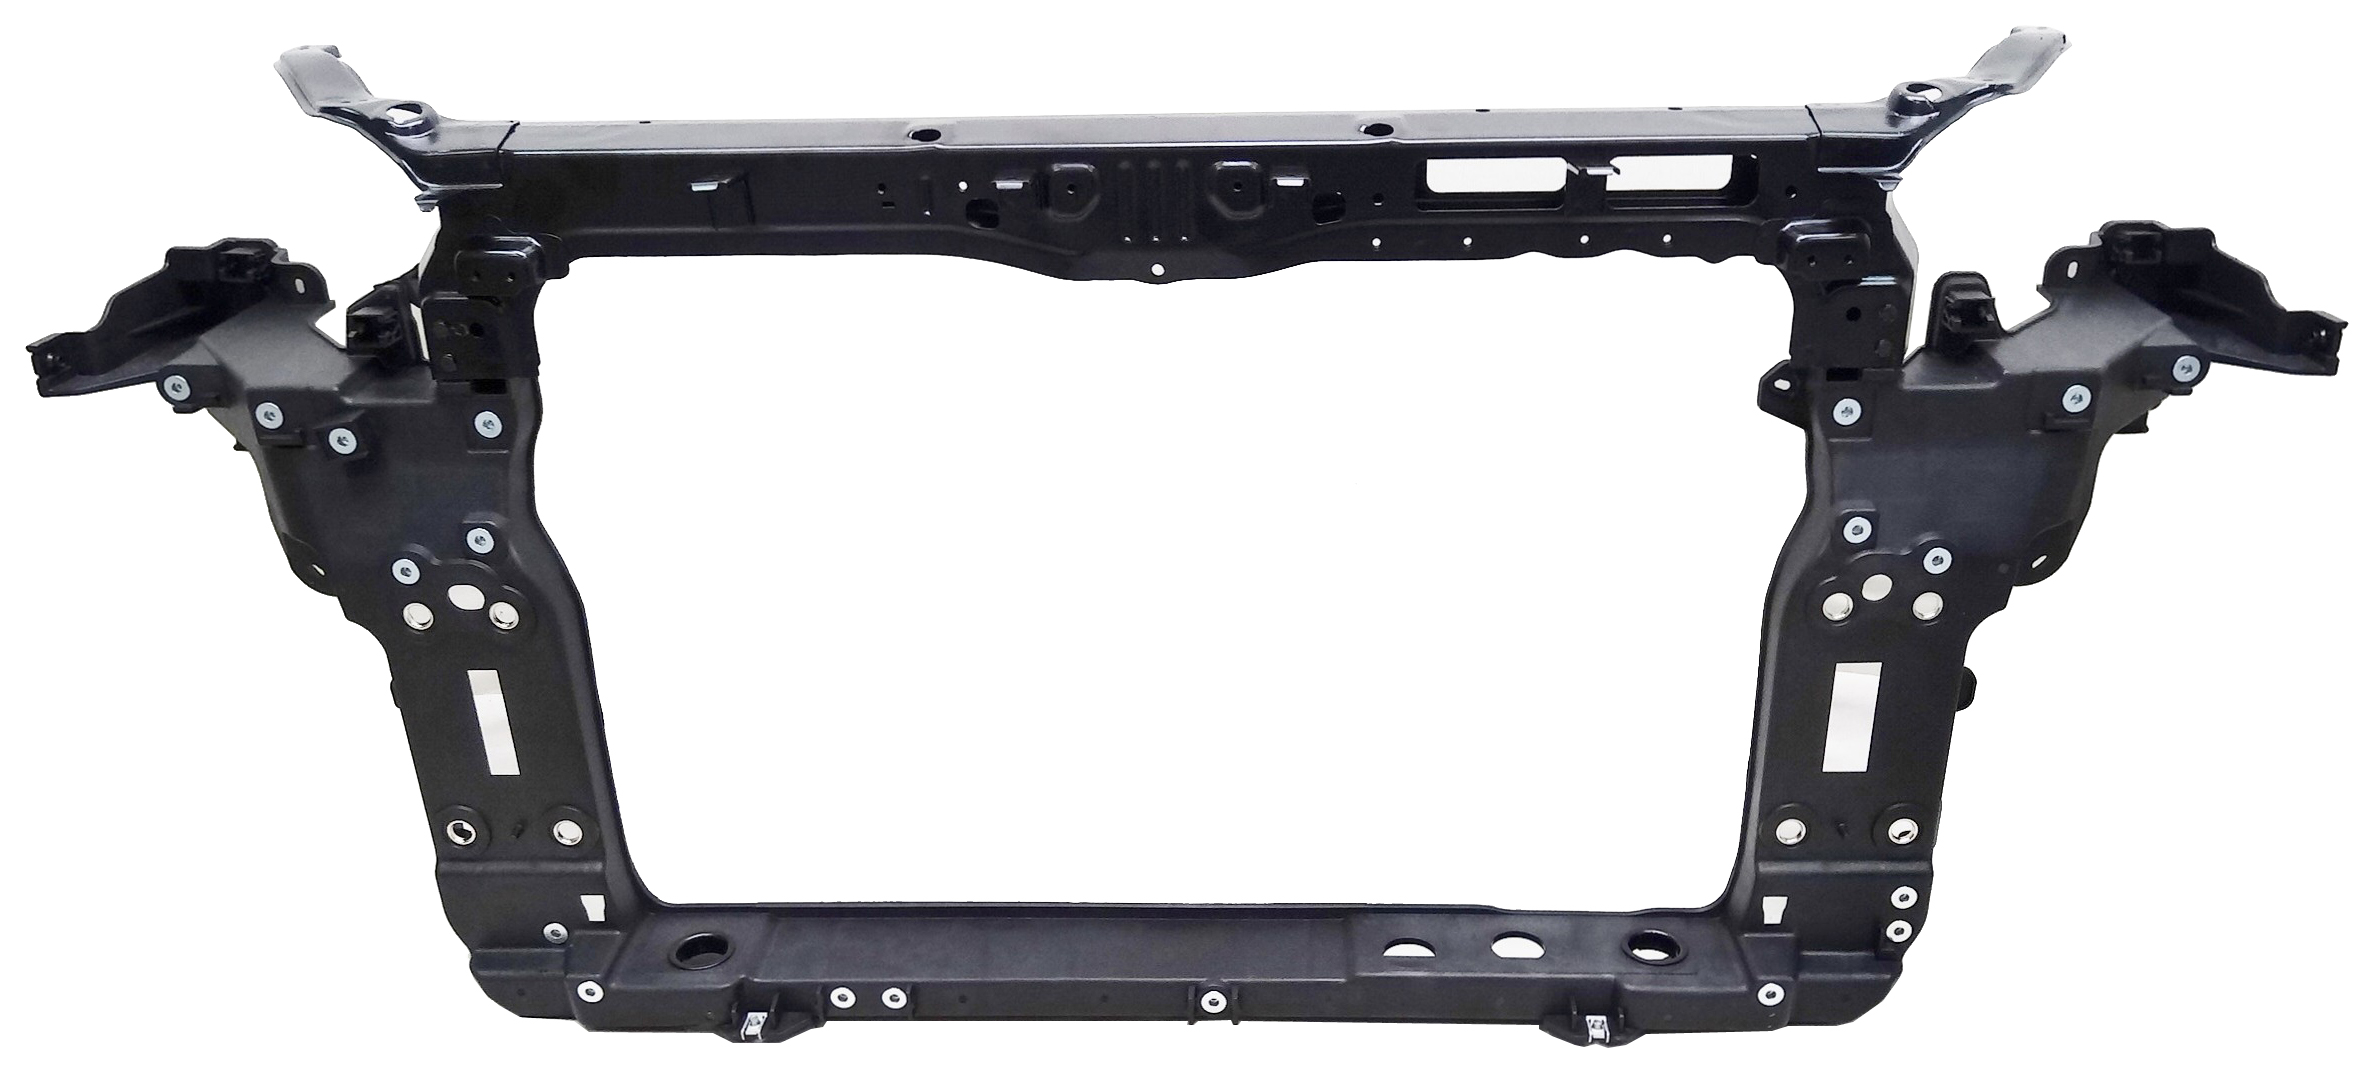 Aftermarket RADIATOR SUPPORTS for HYUNDAI - SANTA FE SPORT, SANTA FE SPORT,13-18,Radiator support